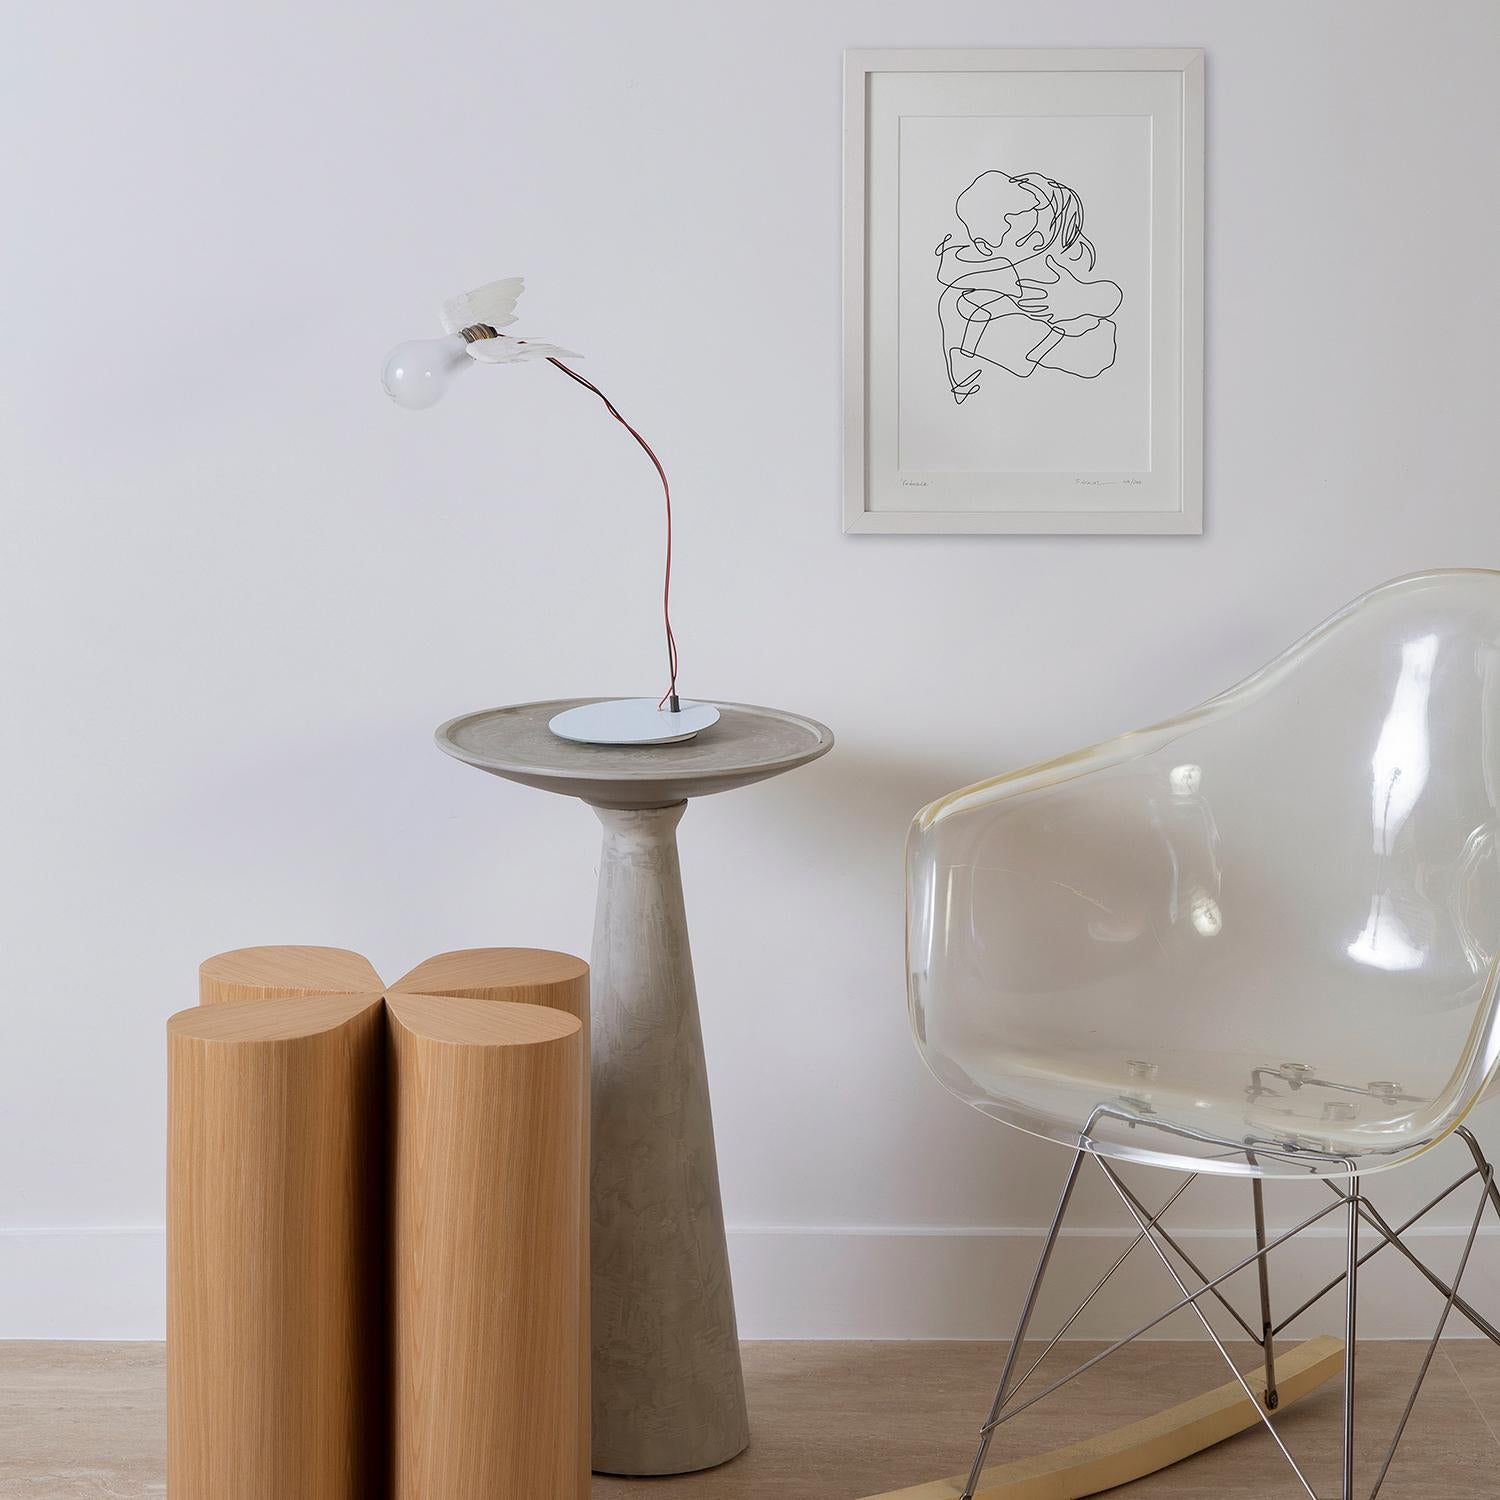 This side table is inspired by the outline of a four-leaf clover, which brings a lot of meanings behind it. They say it is a sign of good luck, good fortune and, in addition, the four-leaf clover can also represent cycles. The four phases of the